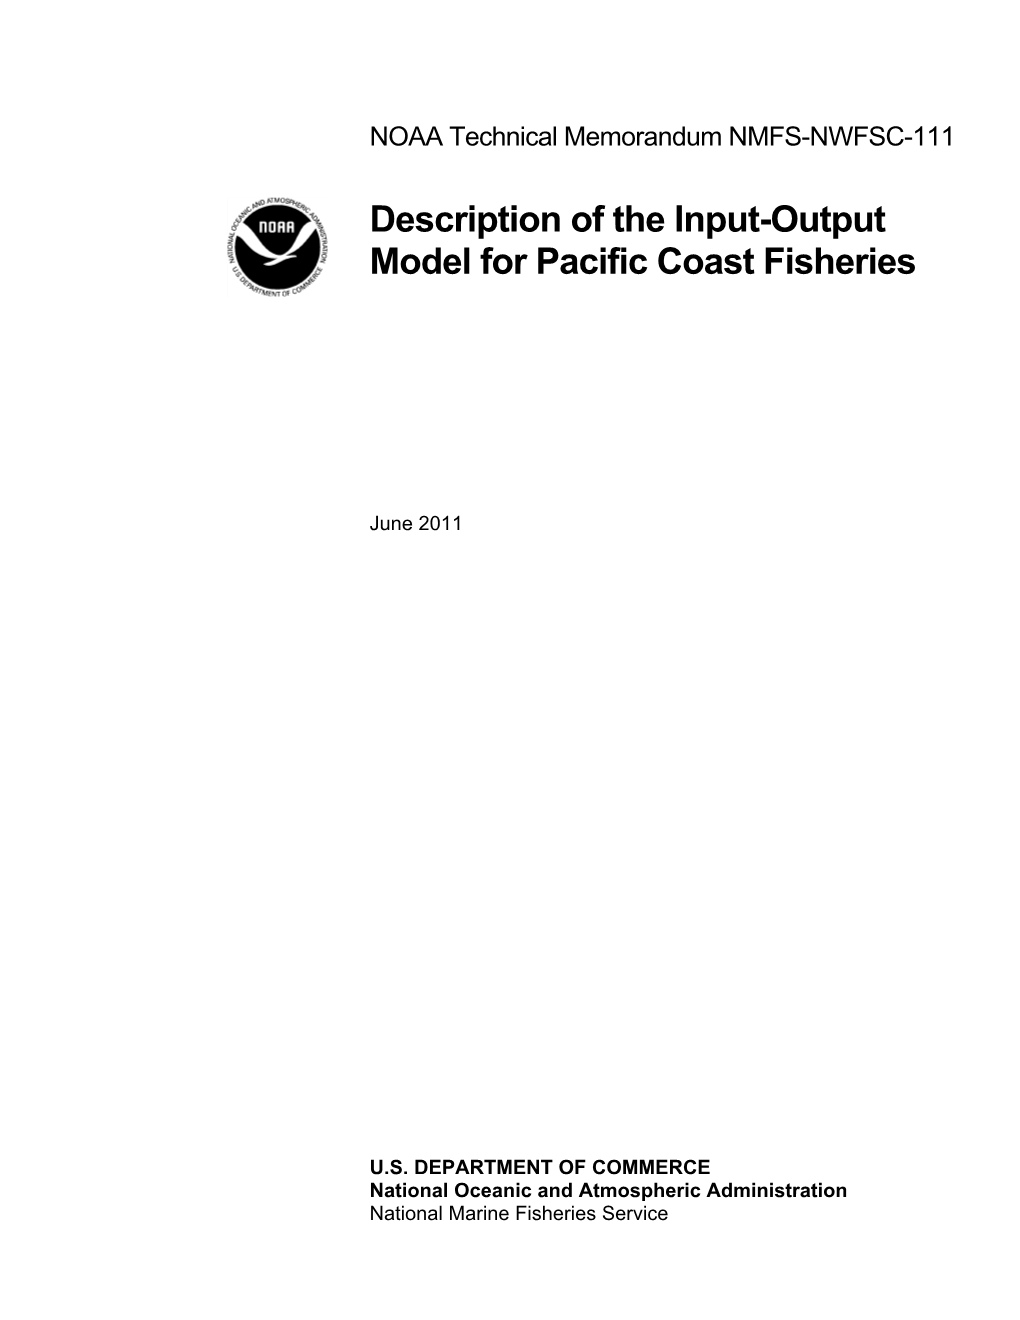 Description of the Input-Output Model for Pacific Coast Fisheries